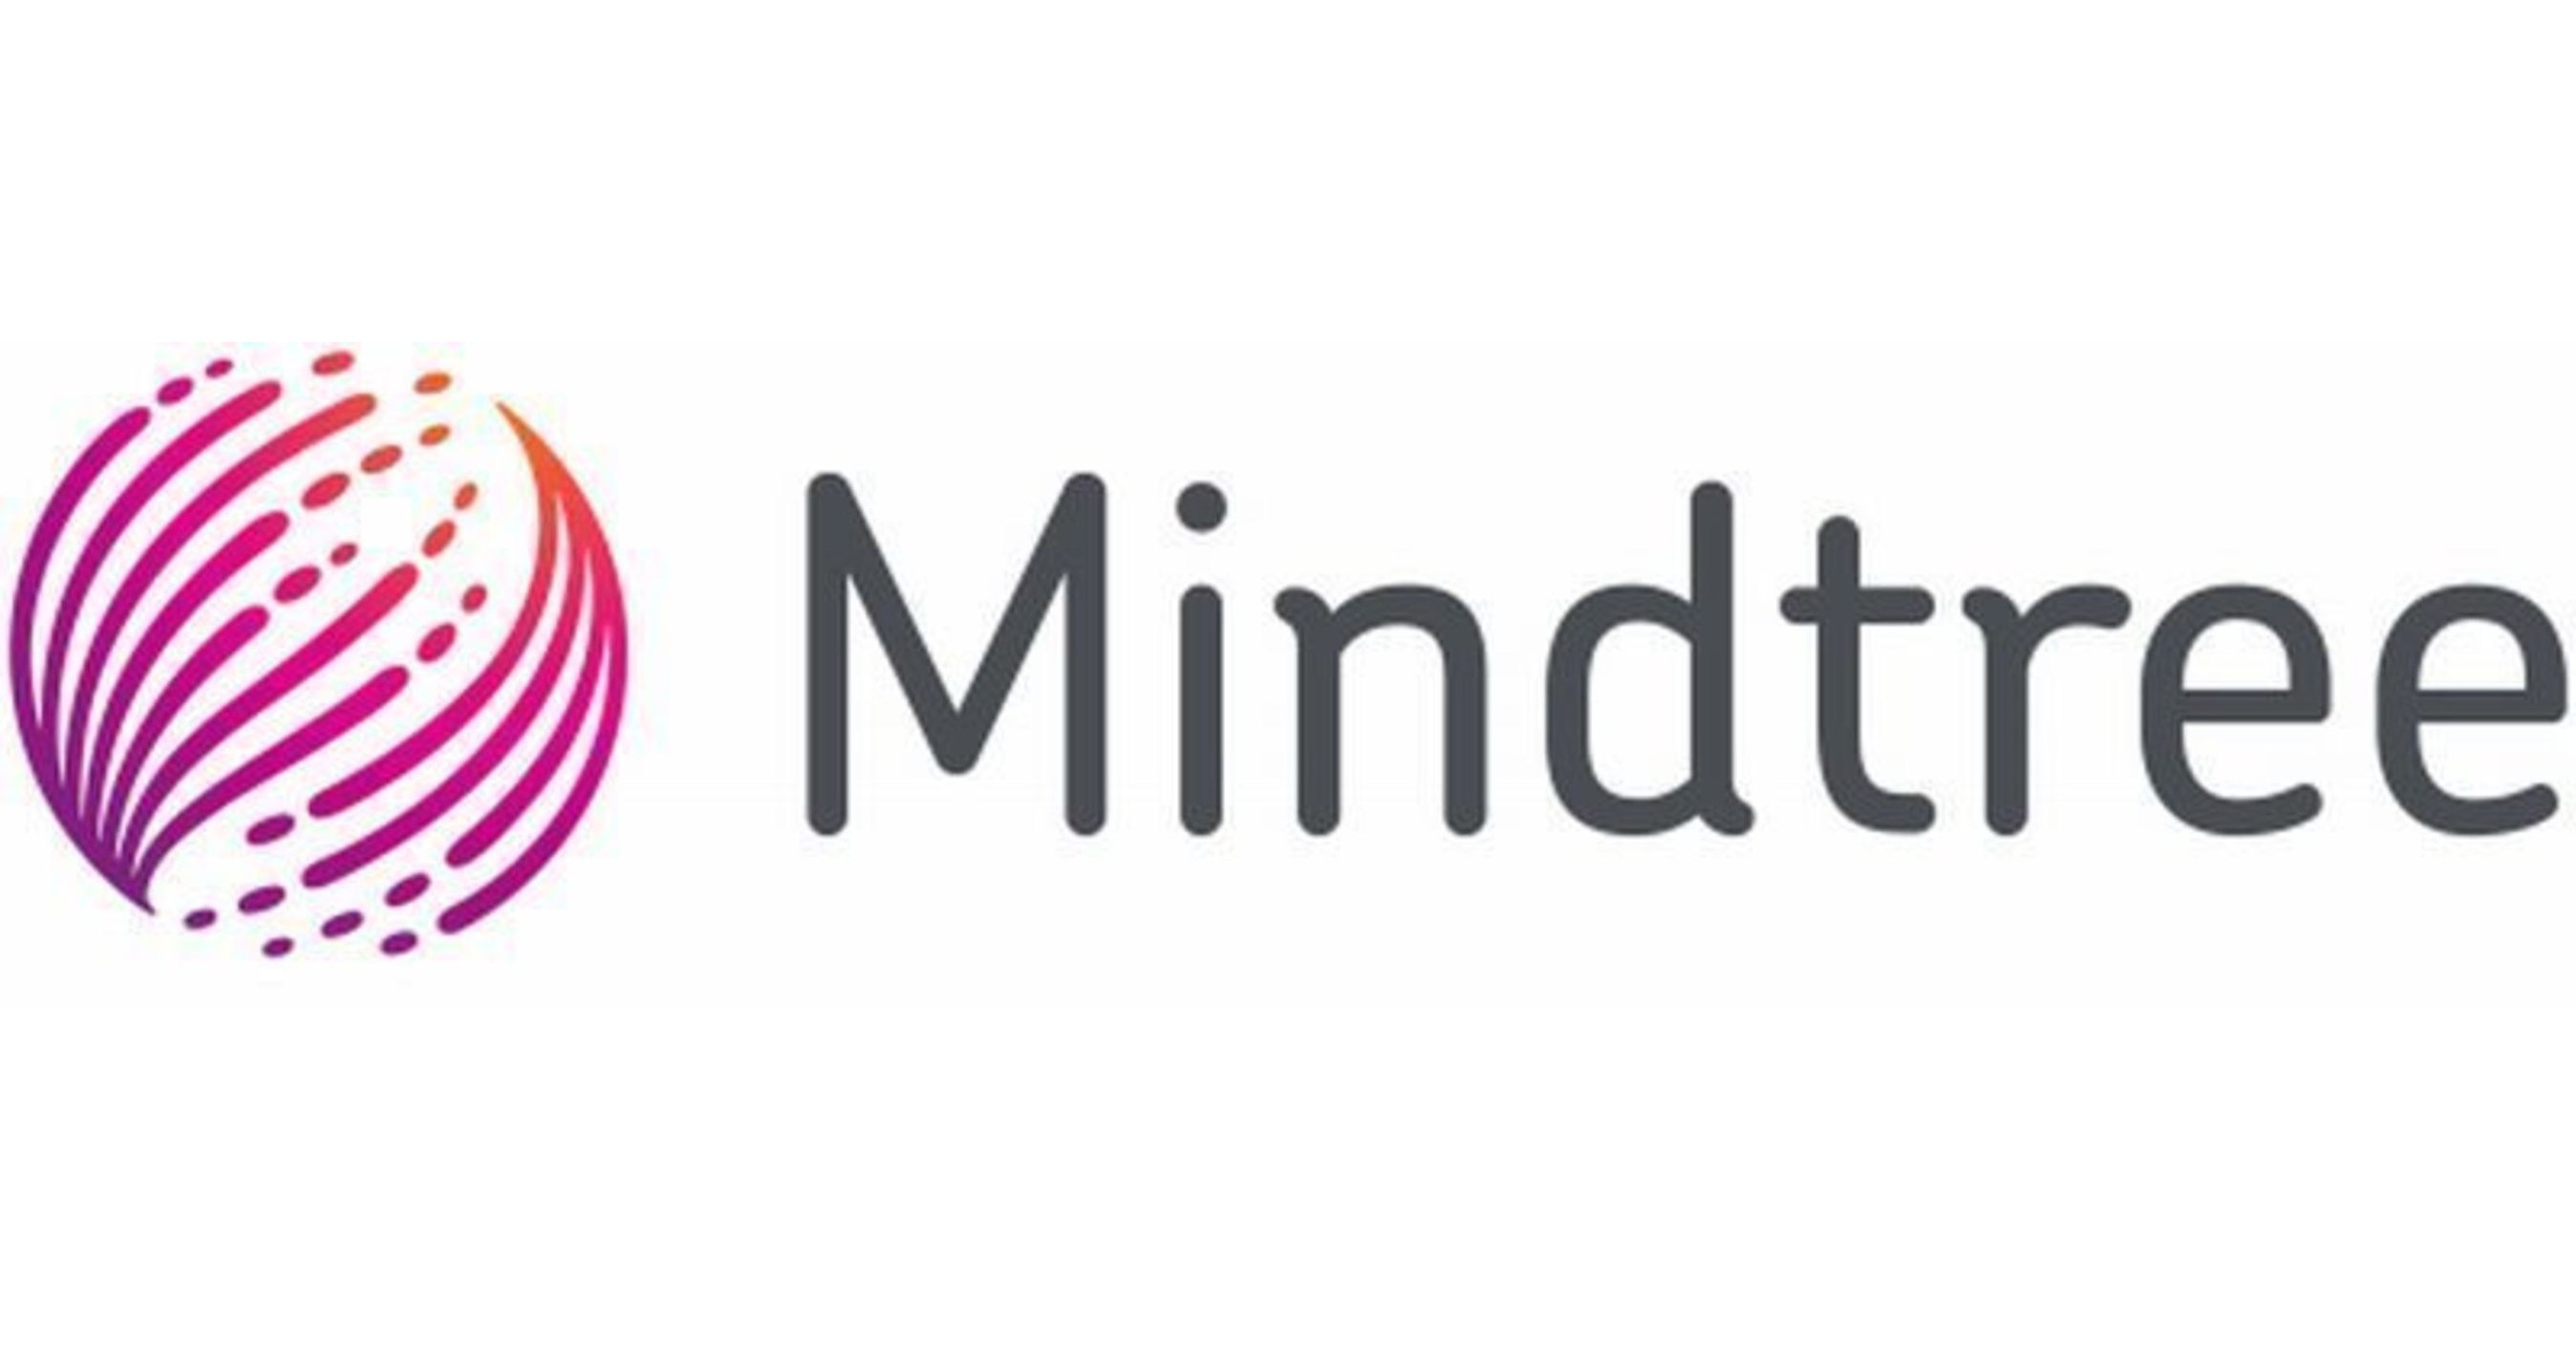 Mindtree Named U.S. Market Leader in IoT Consulting and Services by ISG